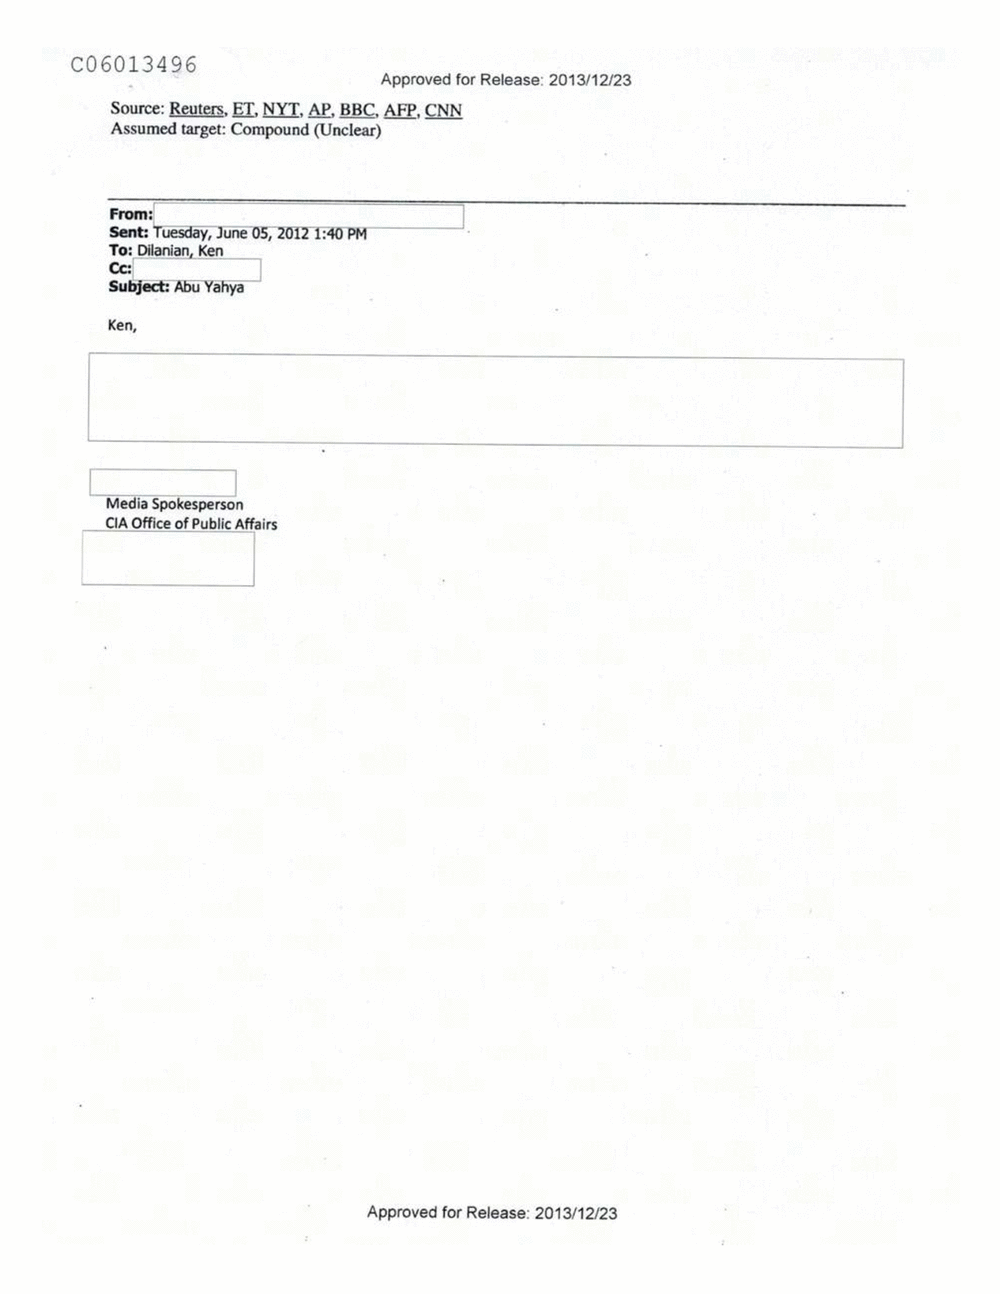 Page 351 from Email Correspondence Between Reporters and CIA Flacks